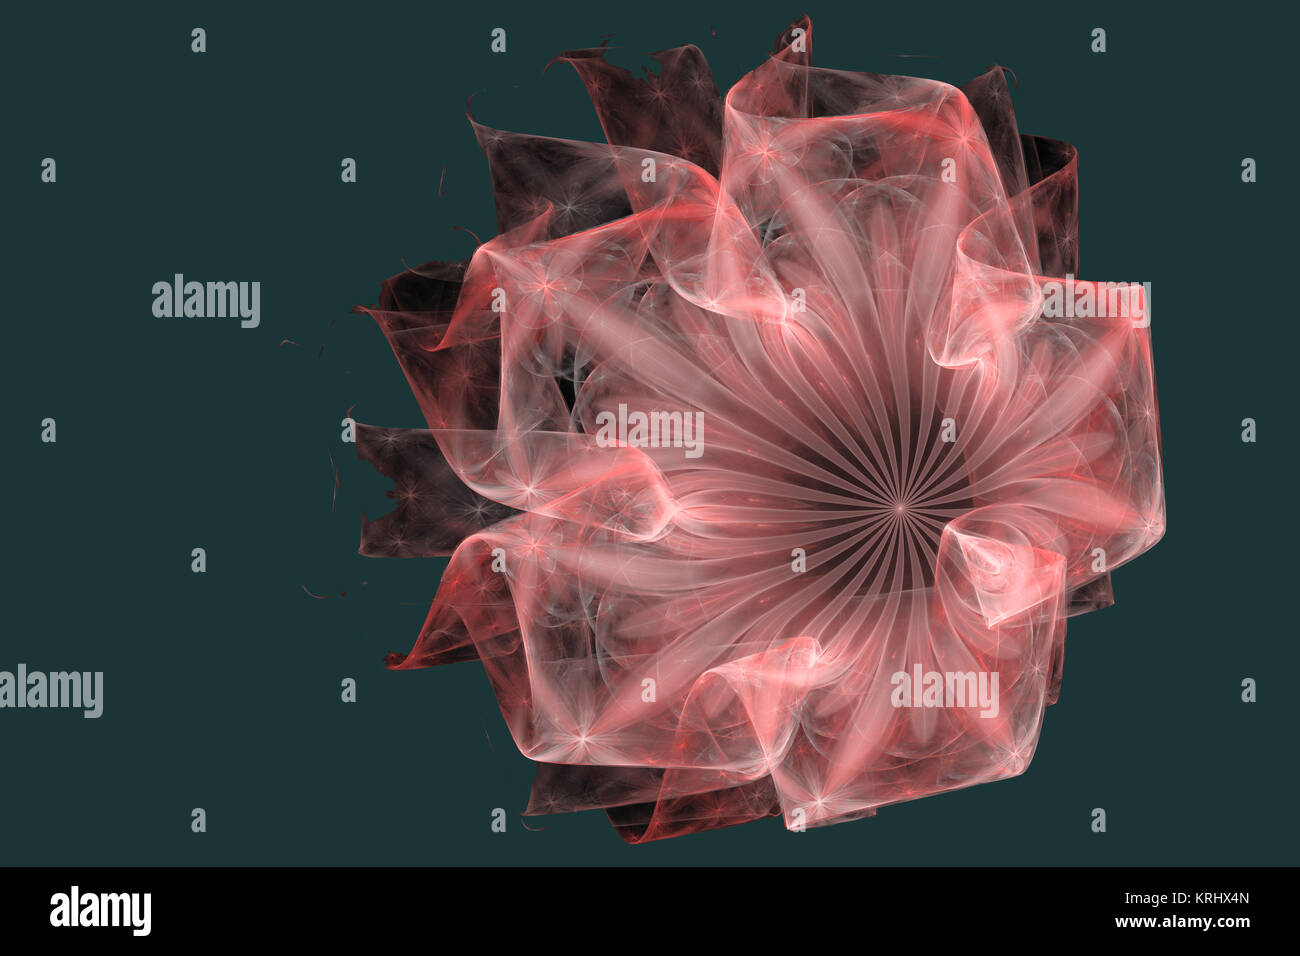 Abstract fractal image with a flower fancy unreal shape and beauty. Stock Photo